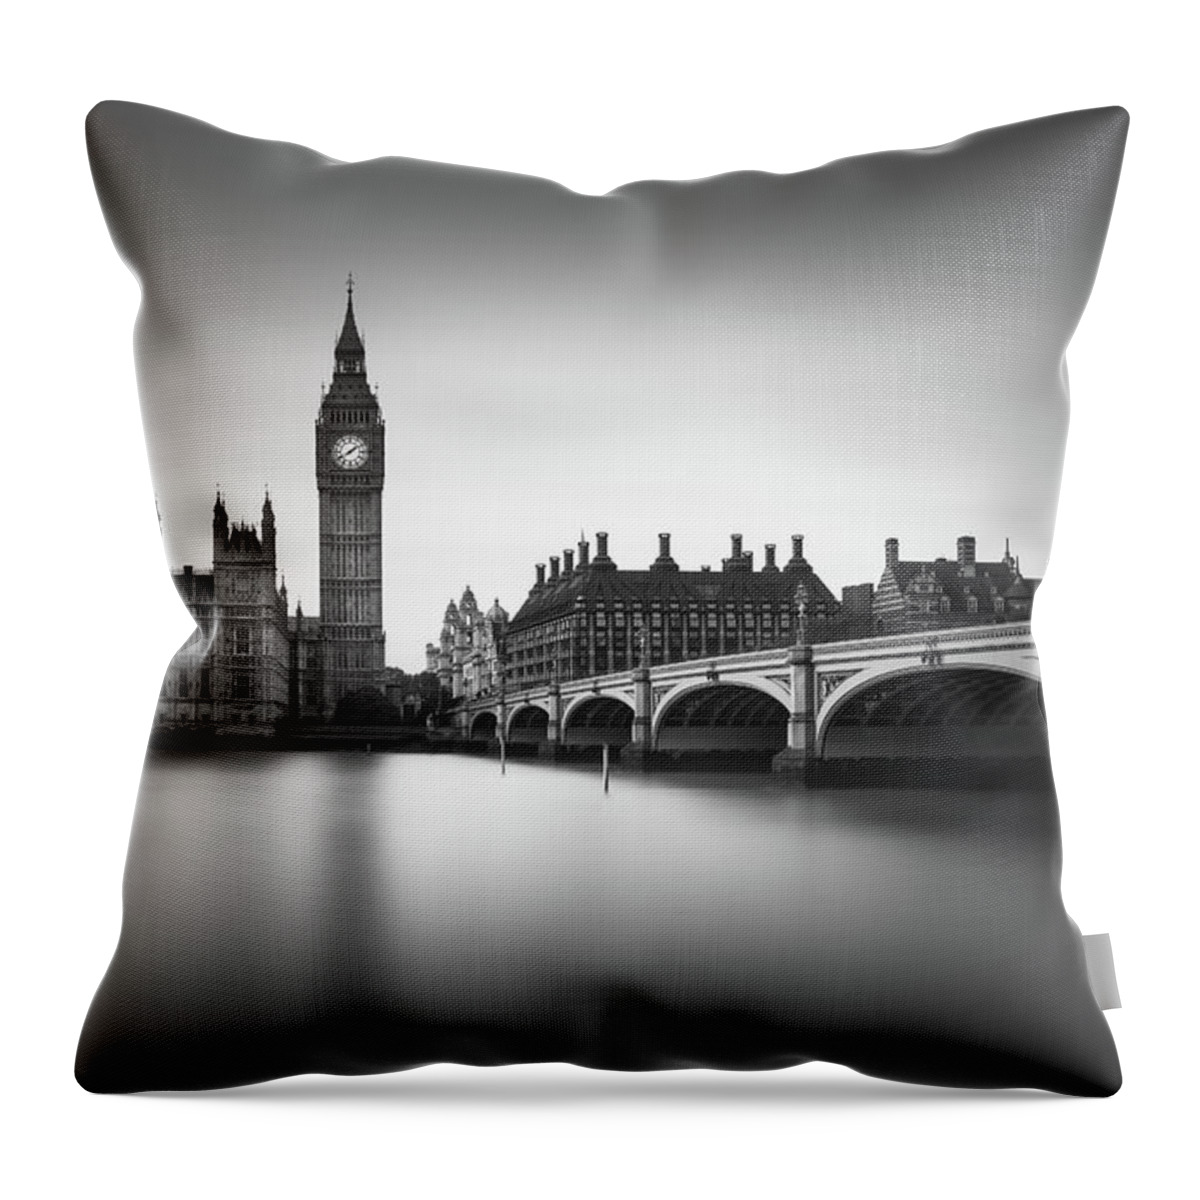 #faatoppicks Throw Pillow featuring the photograph London, Westminster Bridge by Ivo Kerssemakers